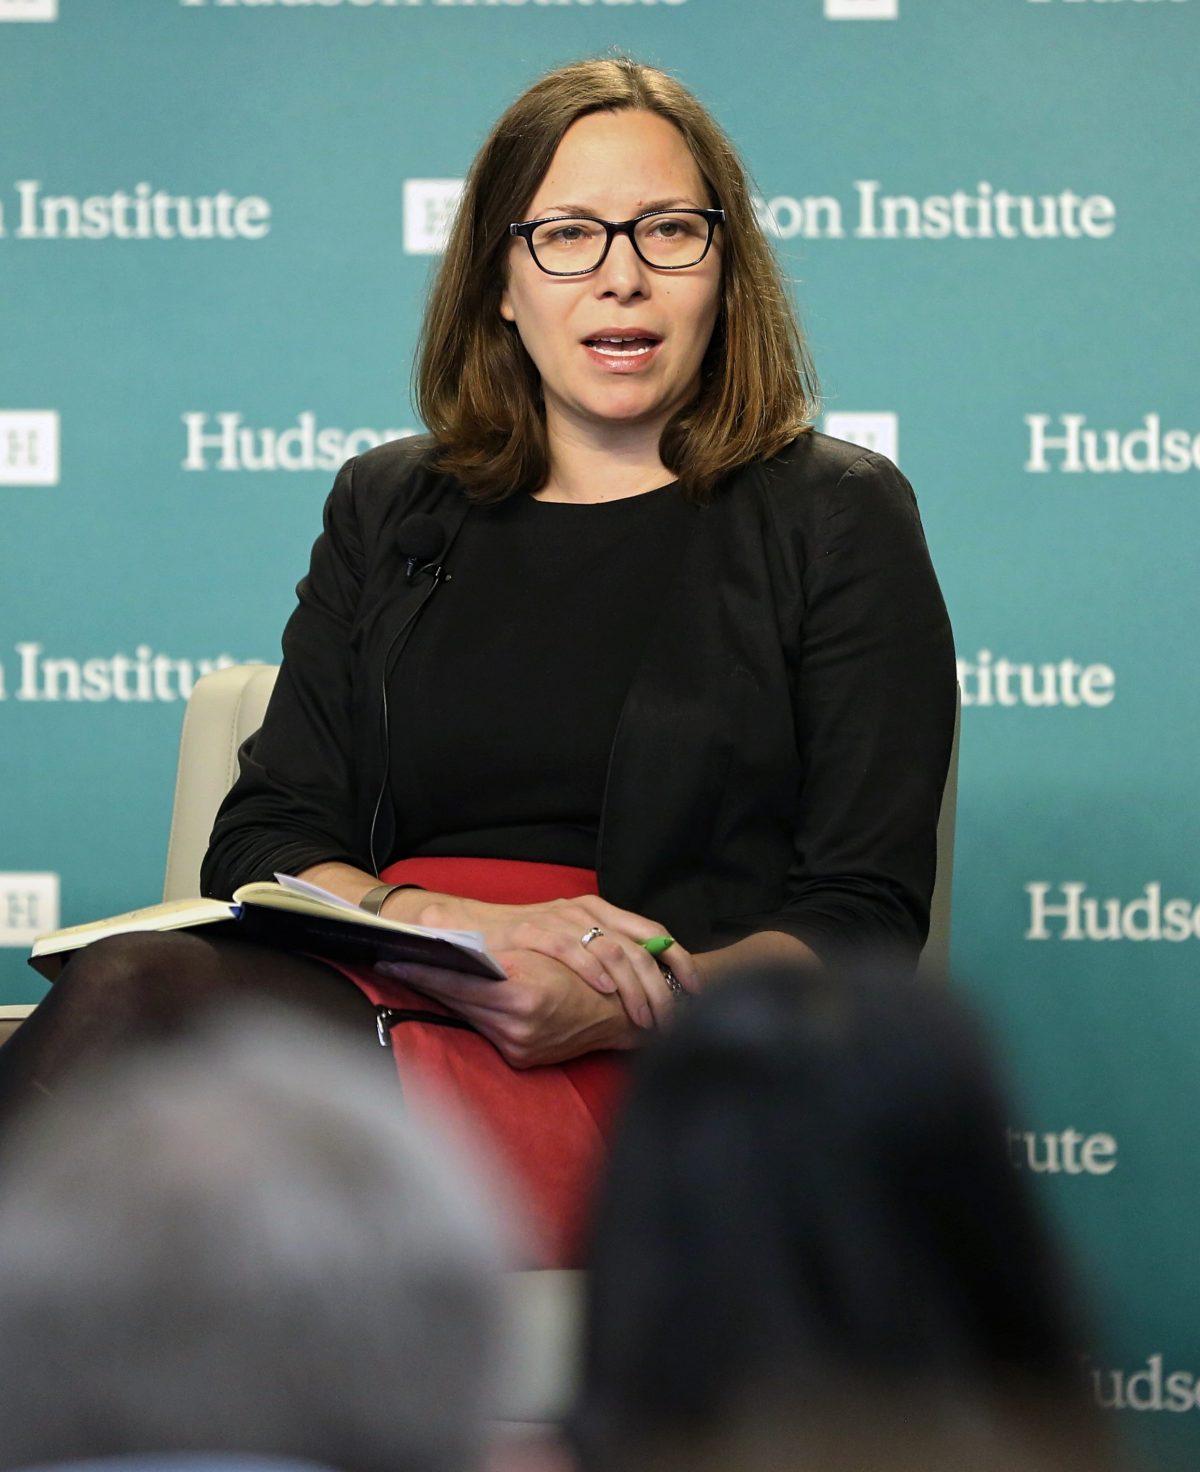 Laura Rosenberger, Director of the Alliance for Securing Democracy and a senior fellow at The German Marshall Fund of the United States, speaks at Hudson Institute in Washington on Oct. 24, 2018 (York Du/The Epoch Times)